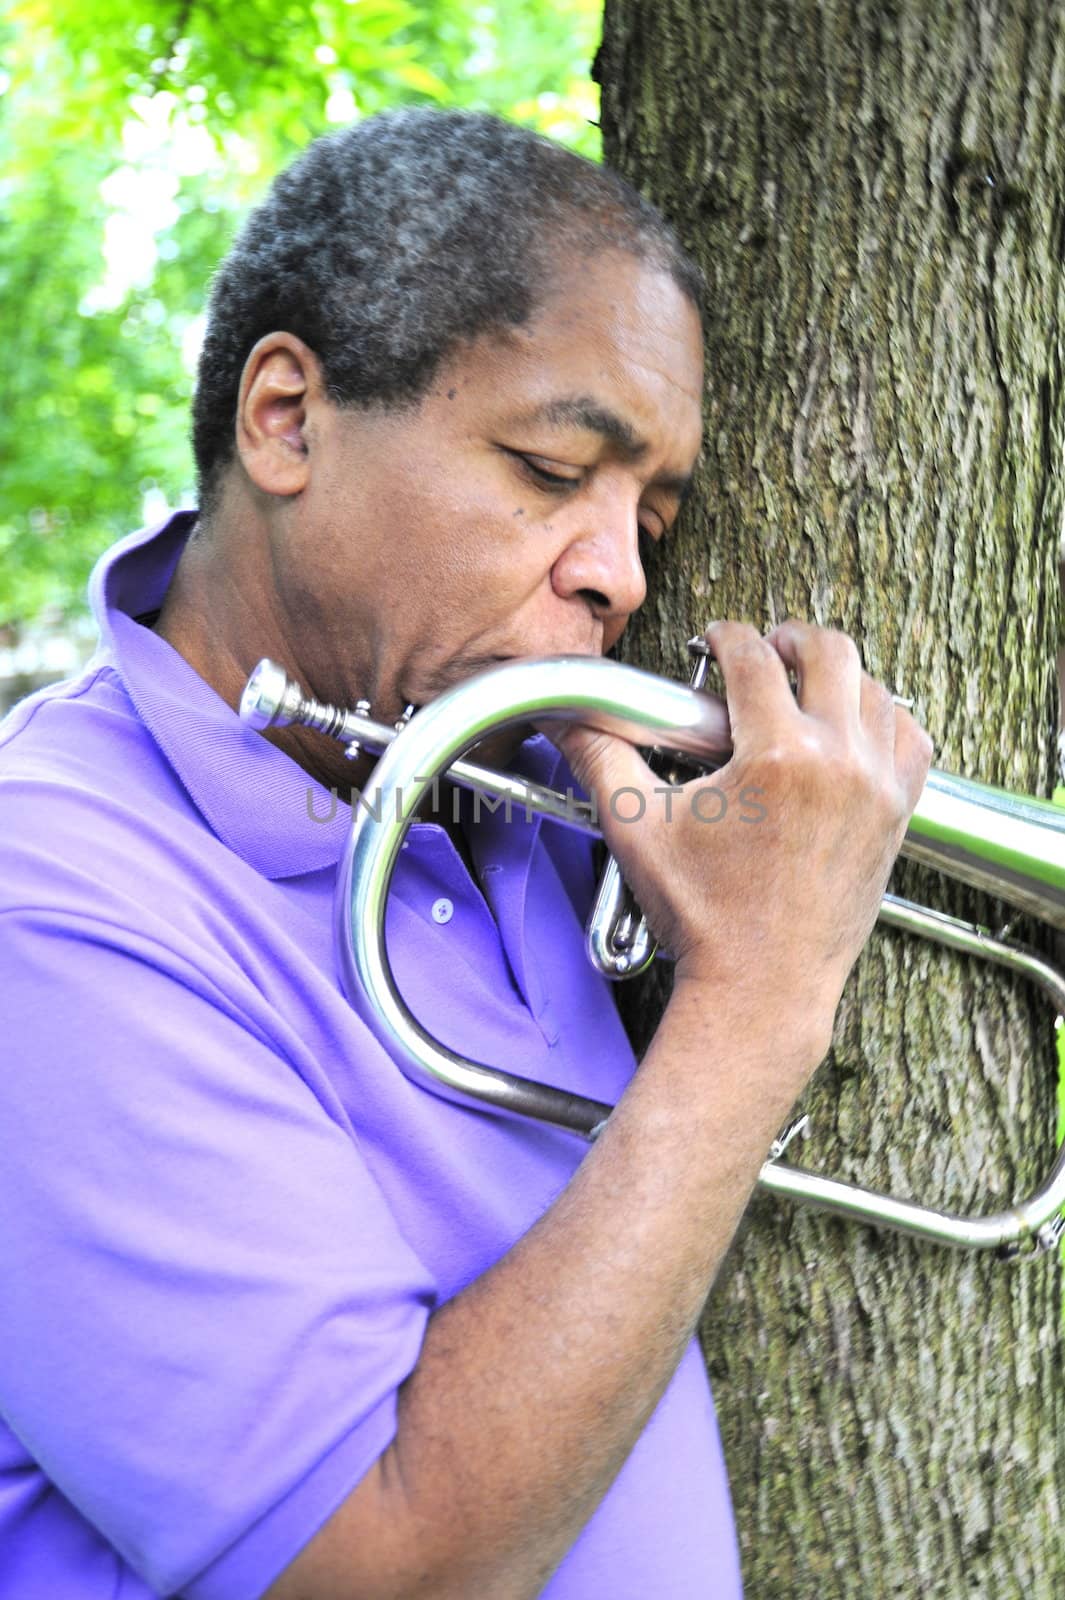 Jazz musician relaxing in the woods with his instrument.